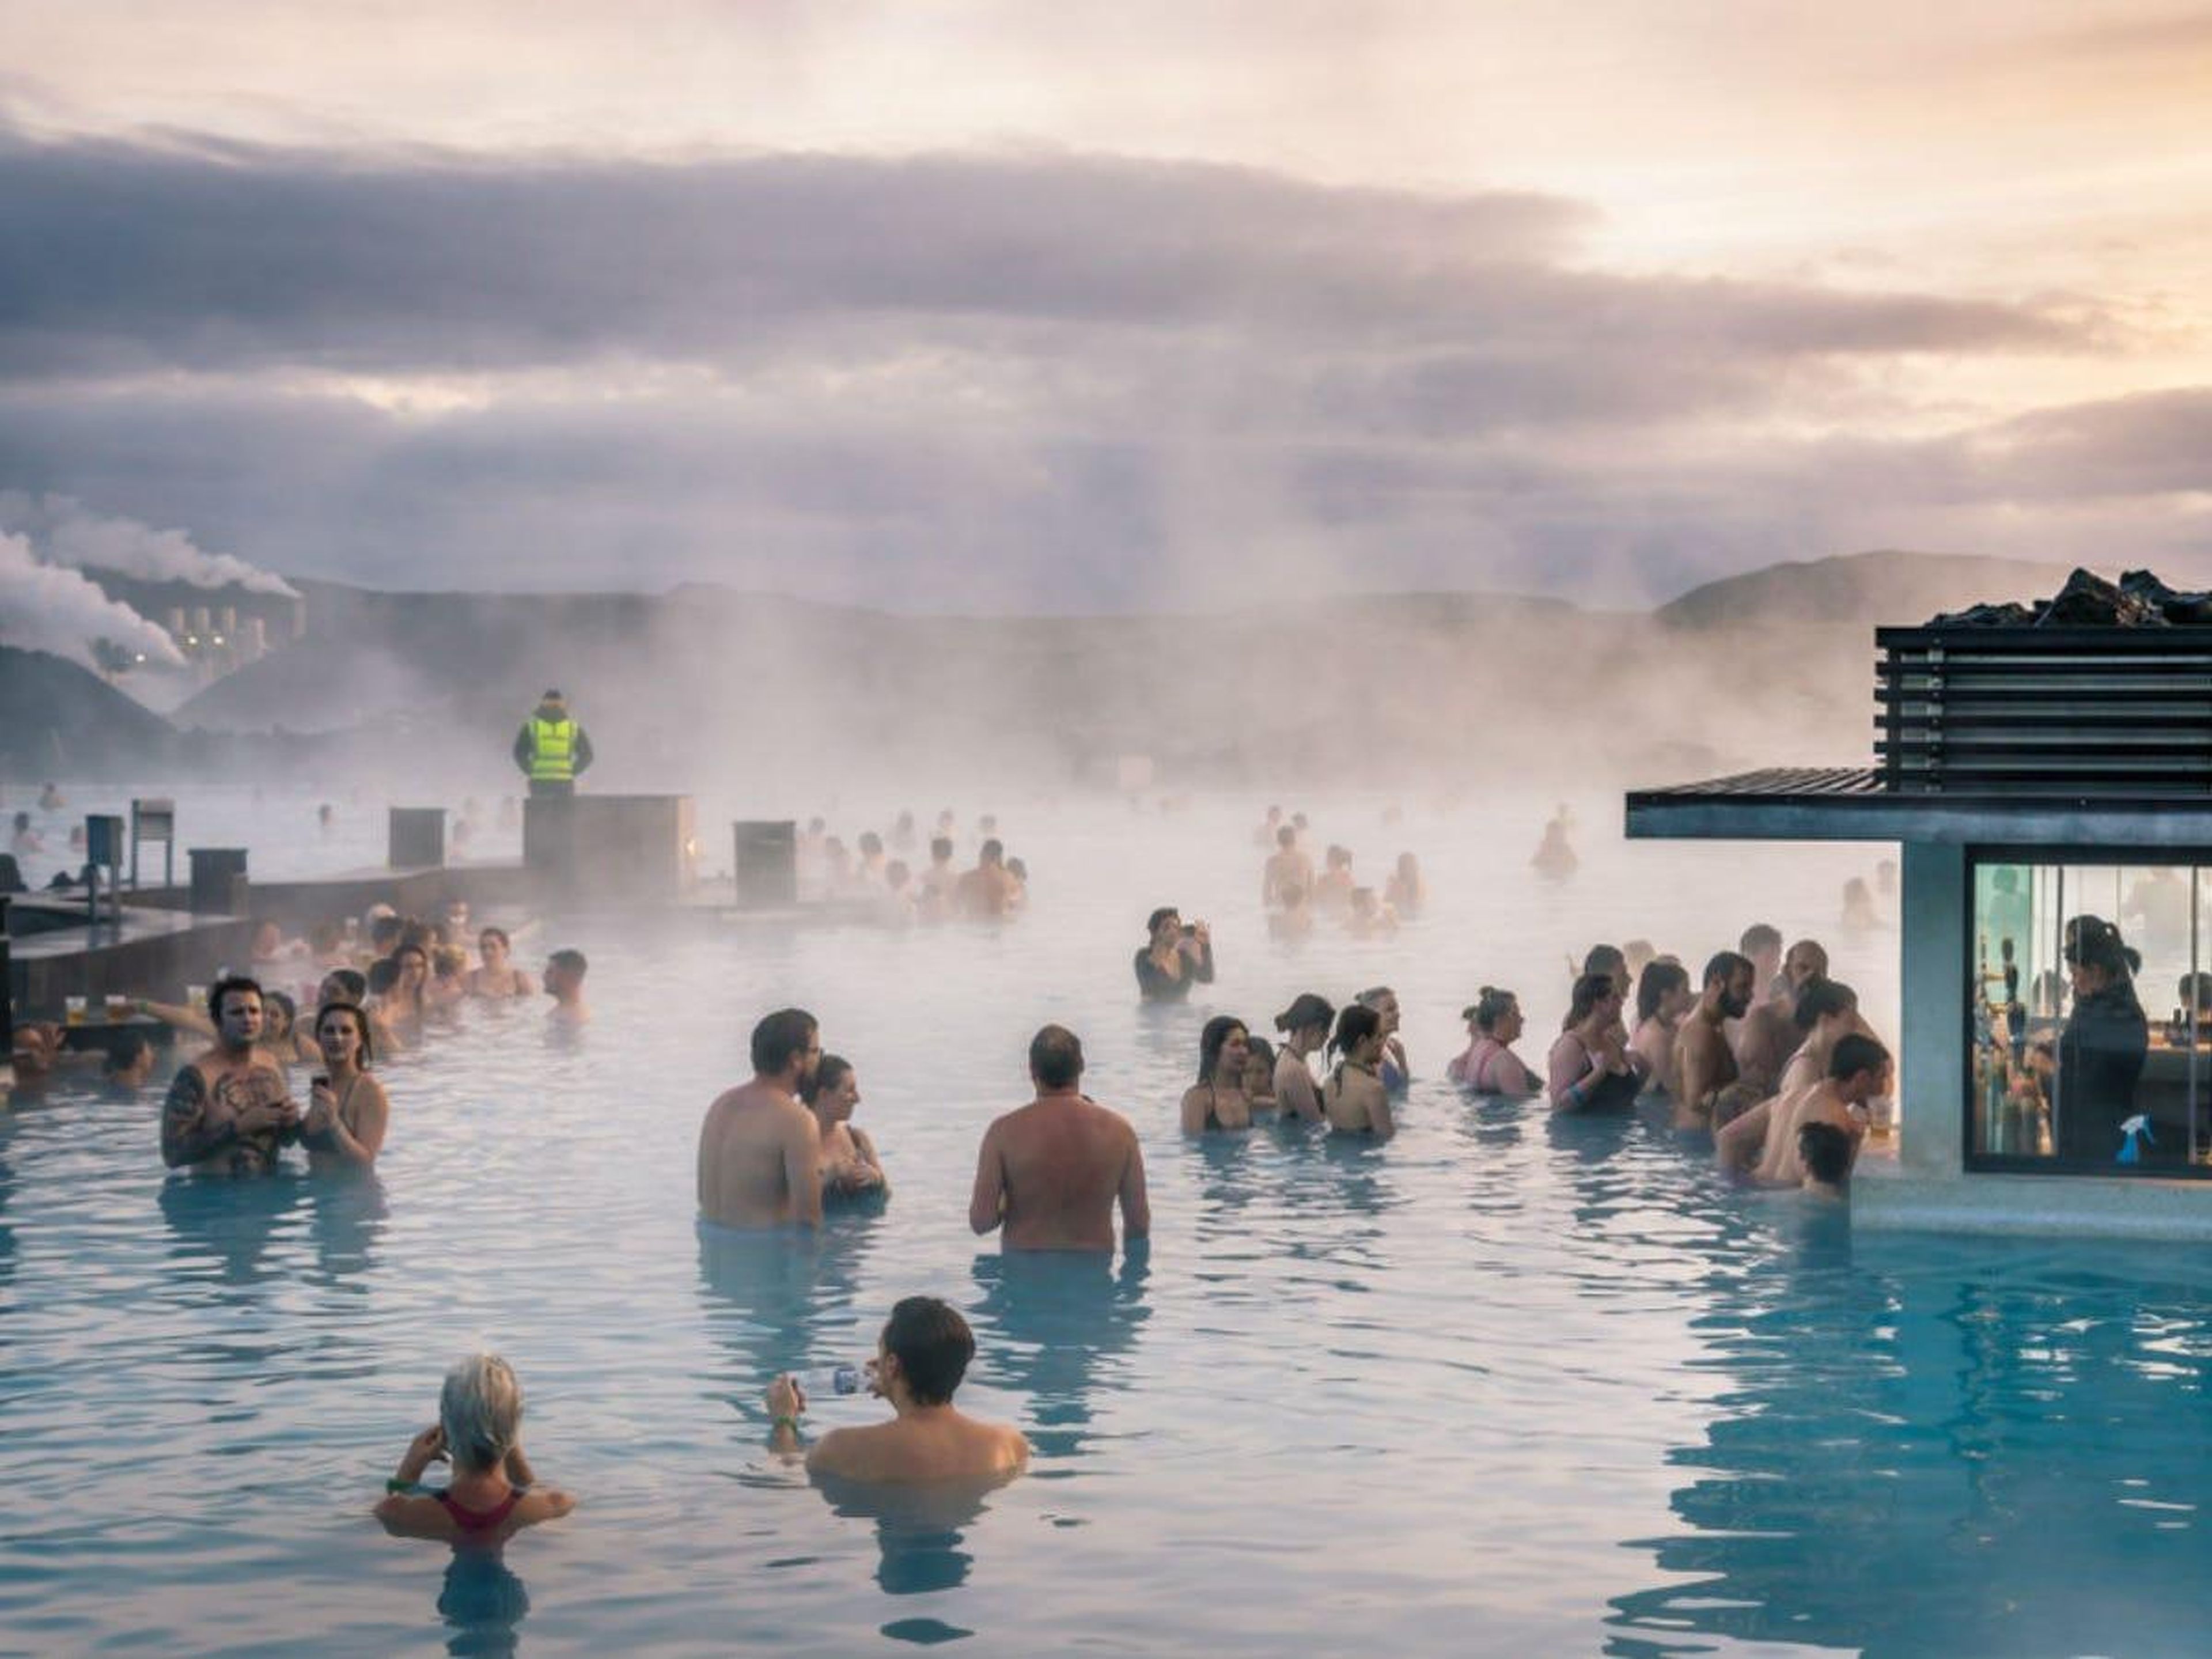 BEFORE: The Blue Lagoon is Iceland's No. 1 attraction. The geothermal spa sees about 1.3 million visitors a year, per the BBC, even though Iceland has a population of only about 330,000.